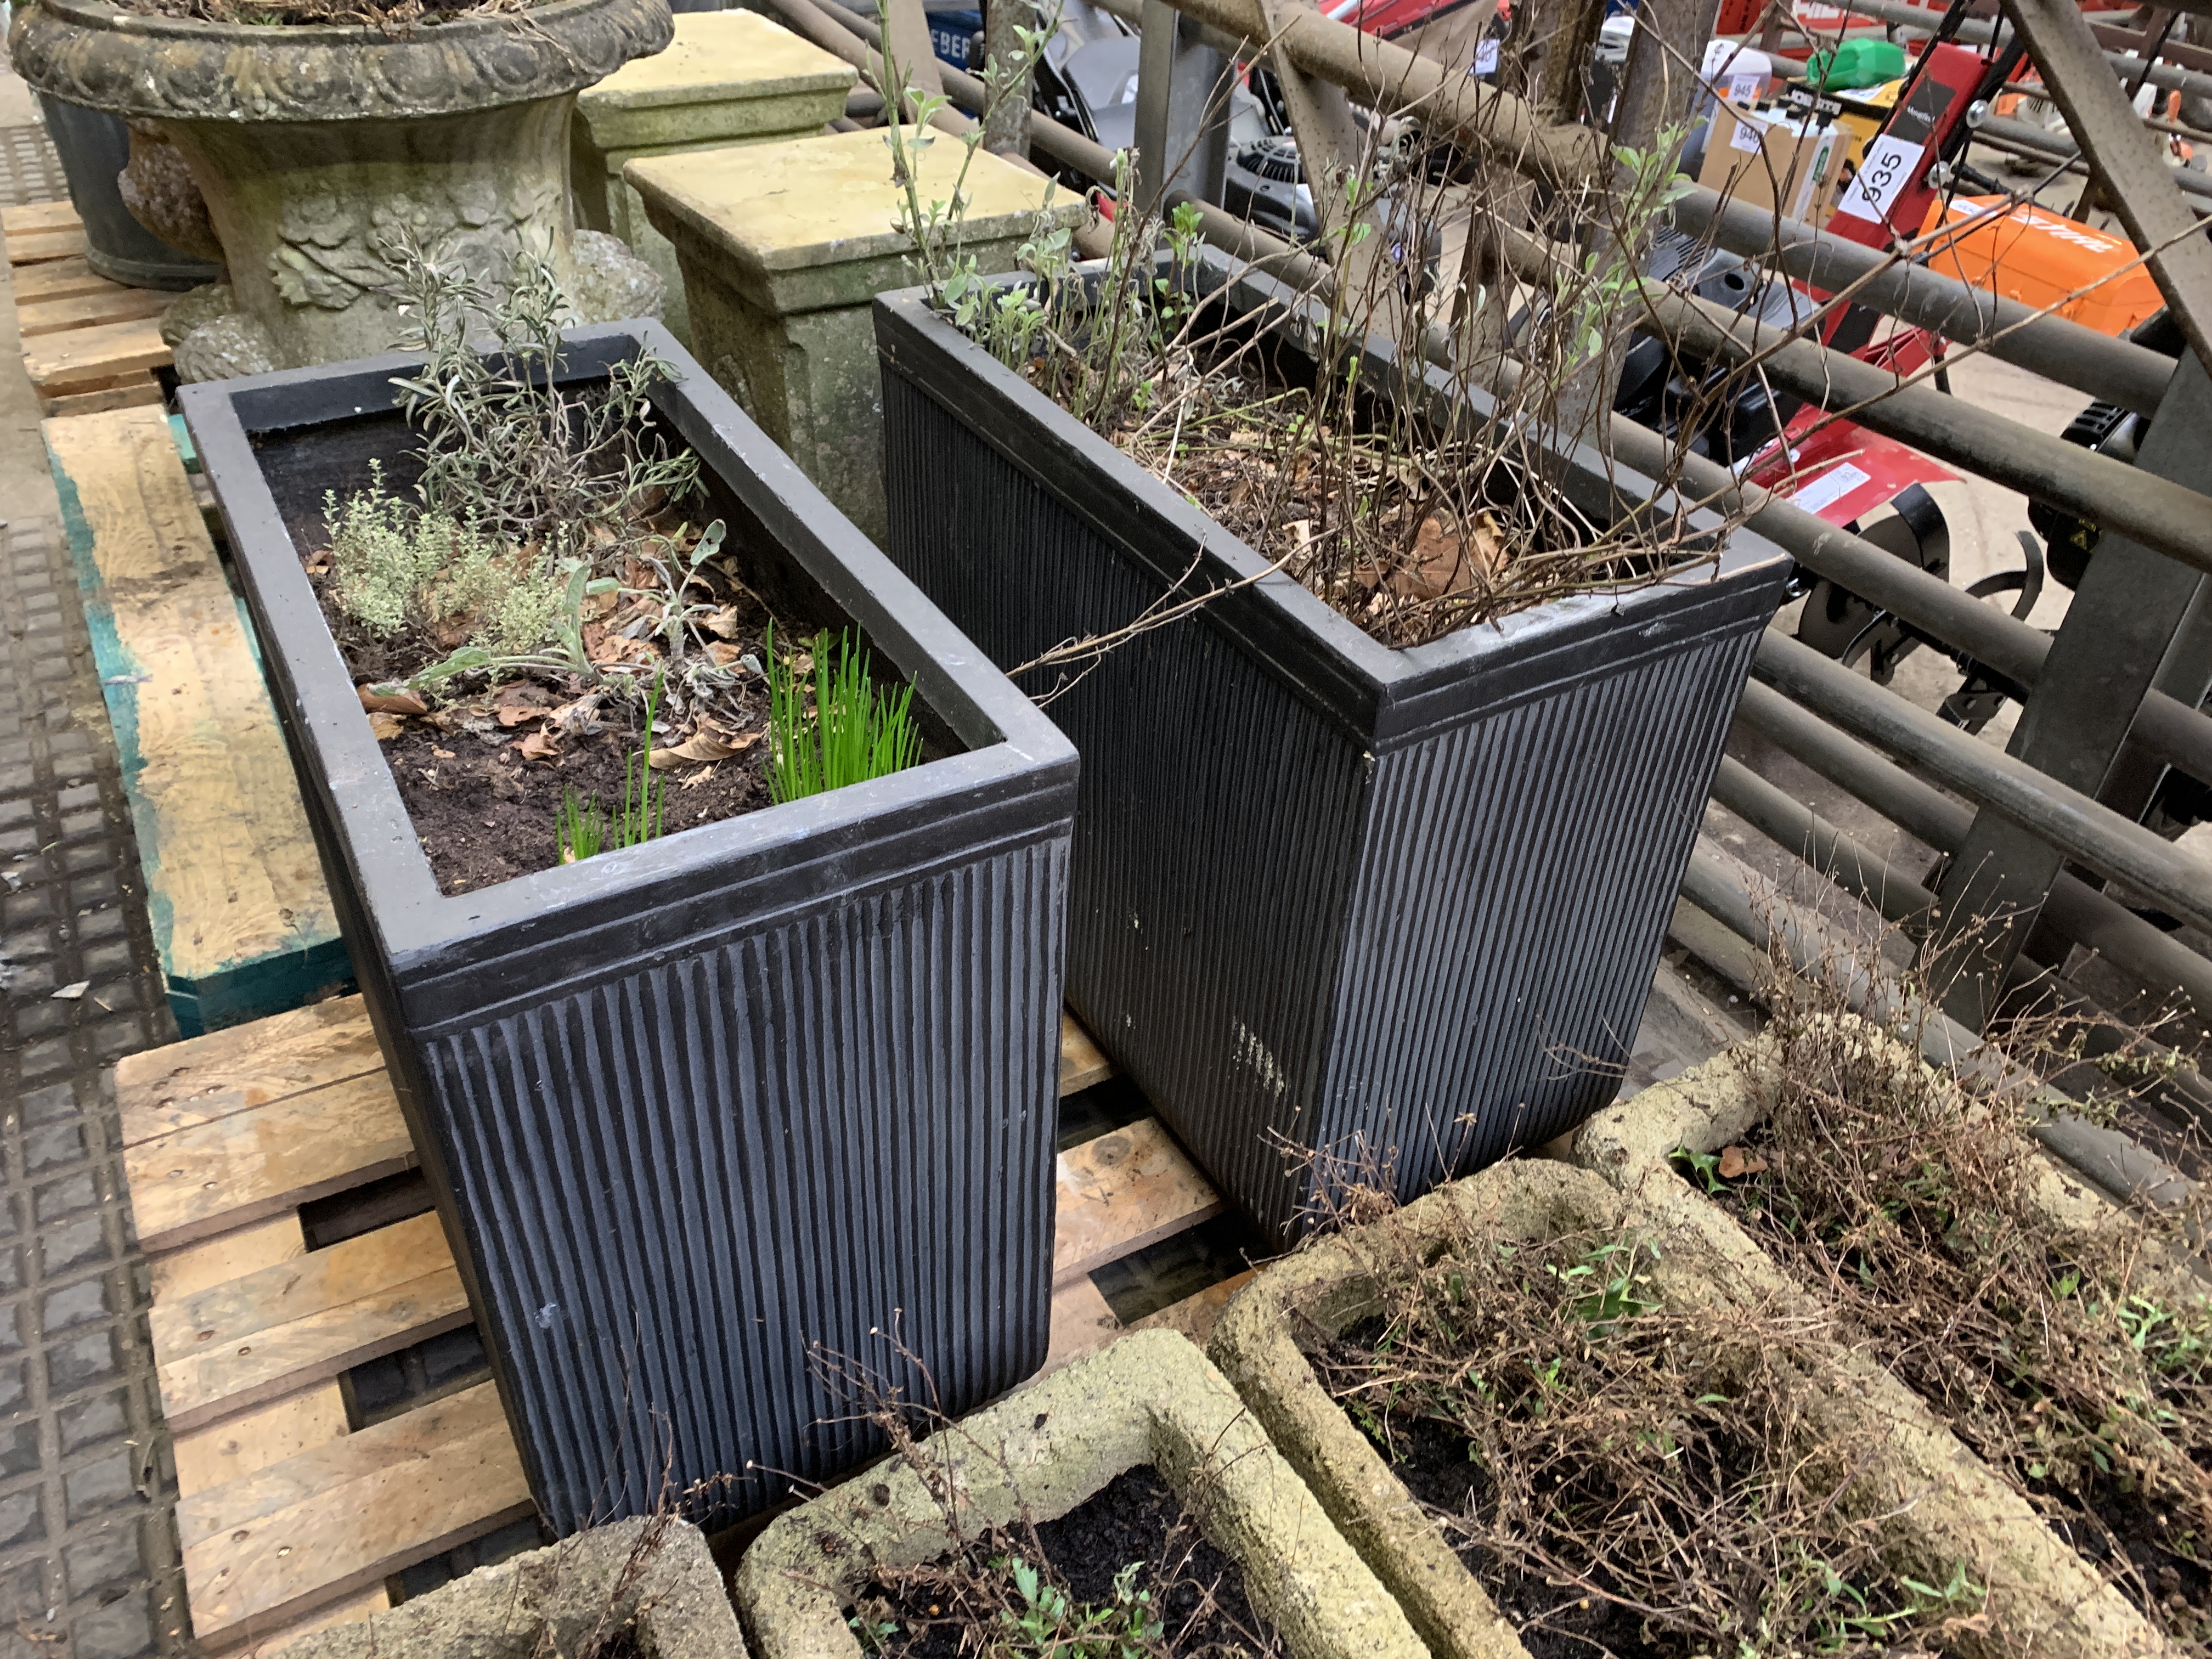 Two filled large ceramic style rectangular planters.